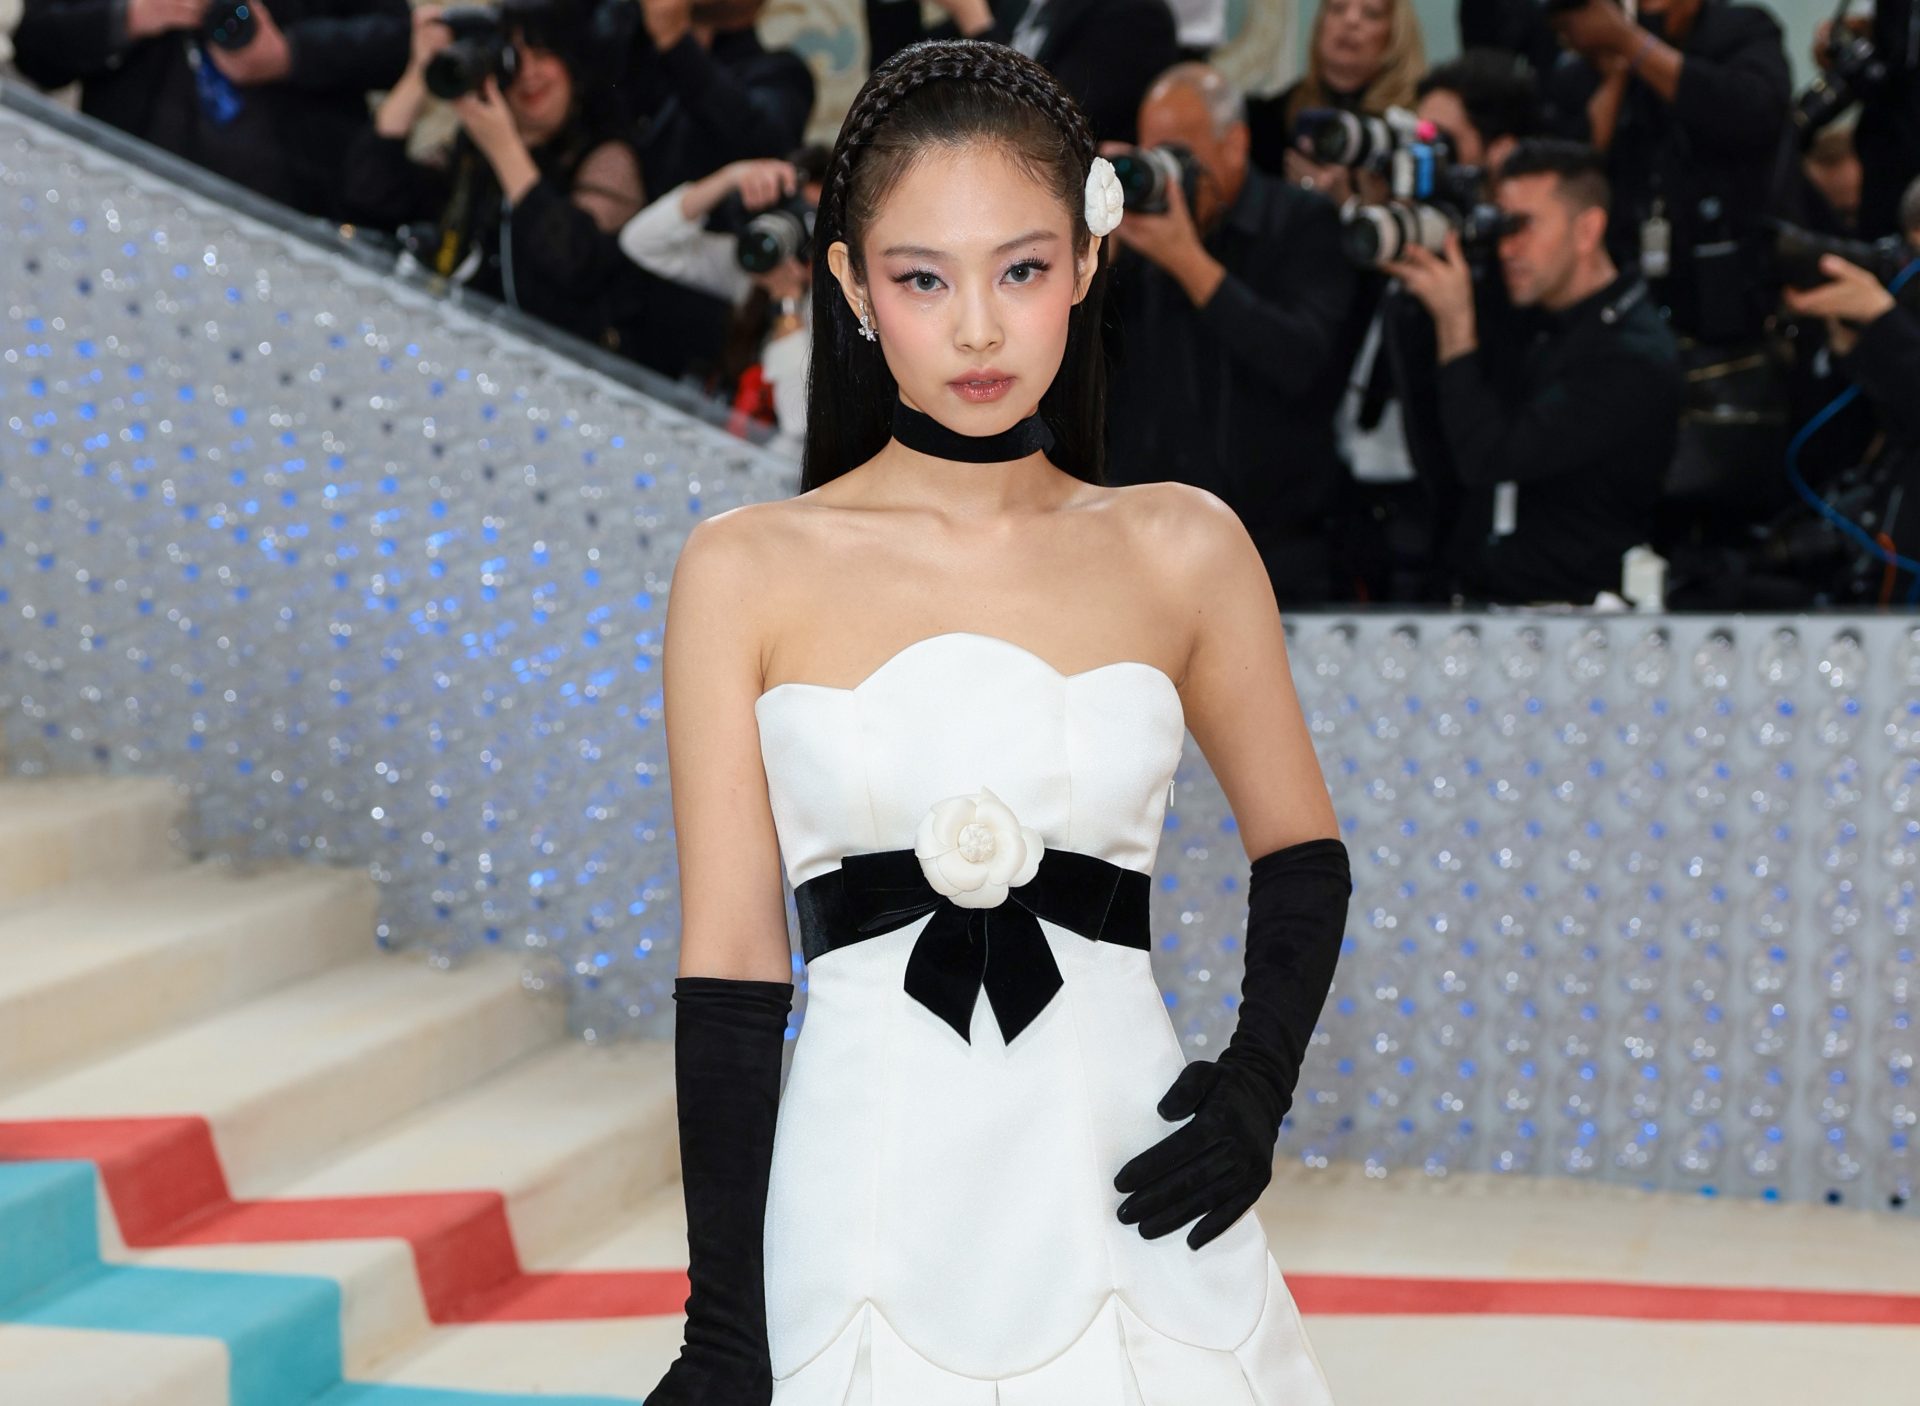 BLACKPINK's Jennie At The Met Gala: The K-Pop Star Makes Her Debut